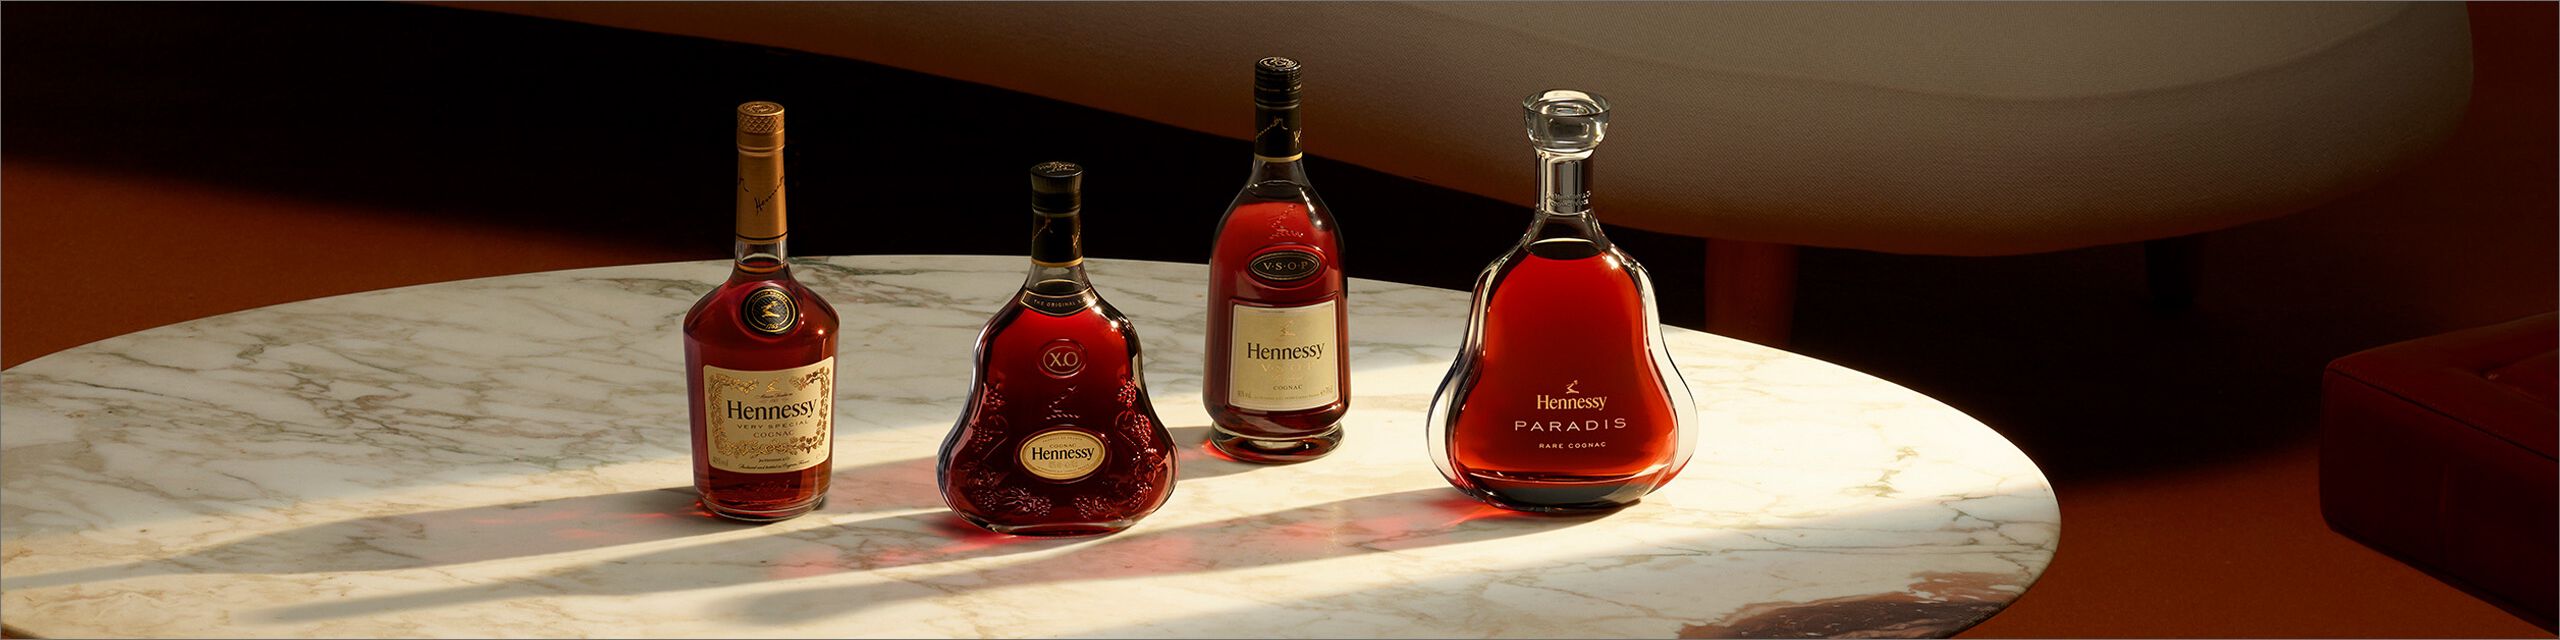 Hennessy whisky for sale